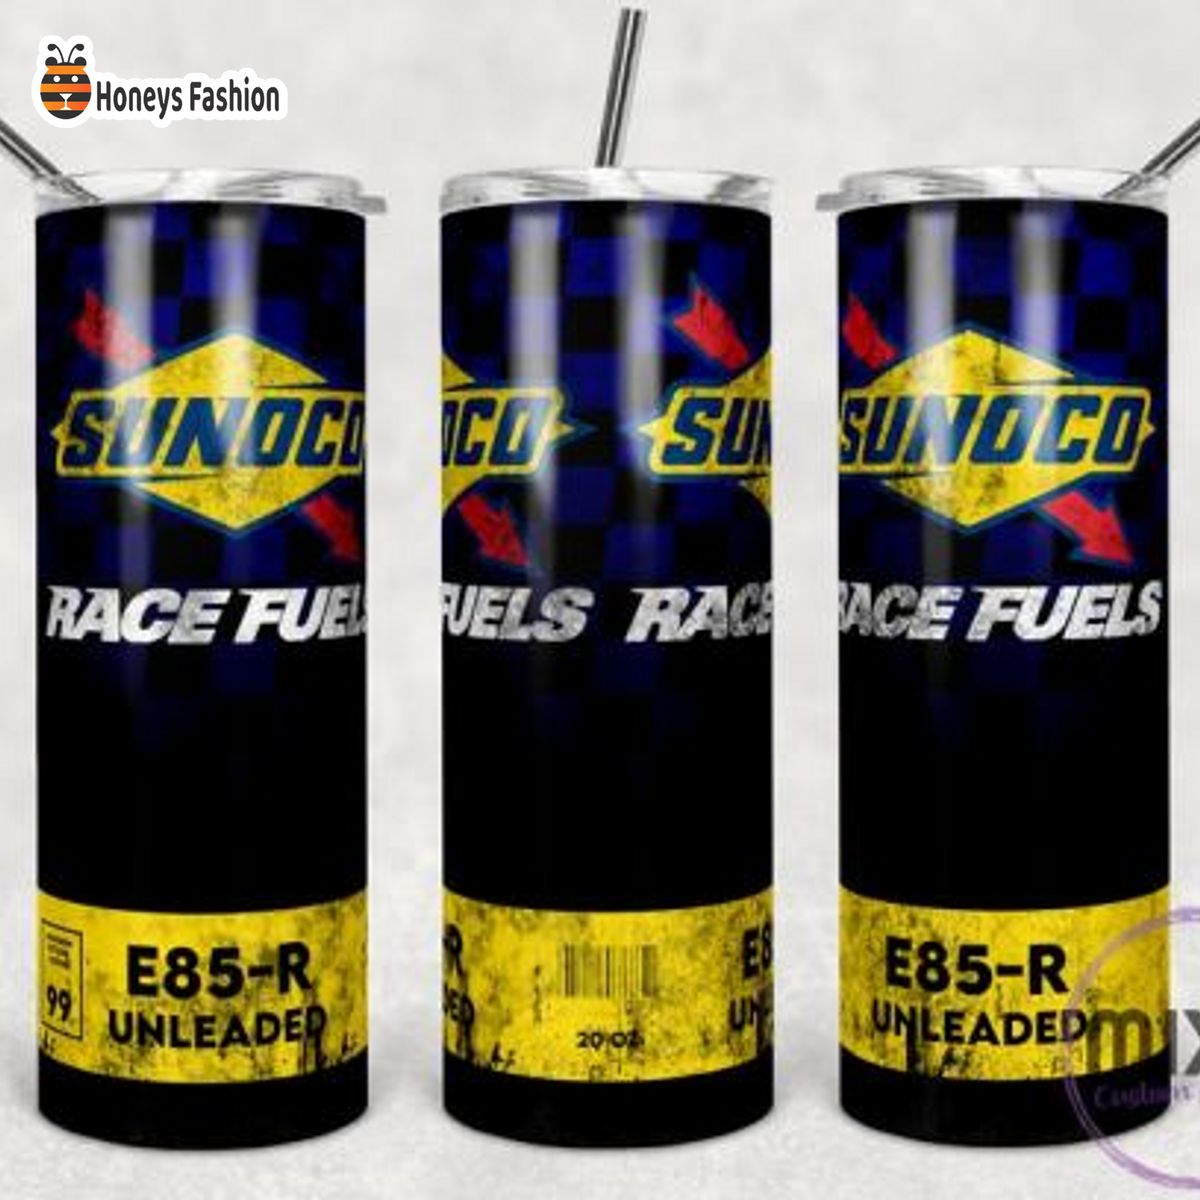 Sunoco Race Fuels Skinny Tumbler Cup